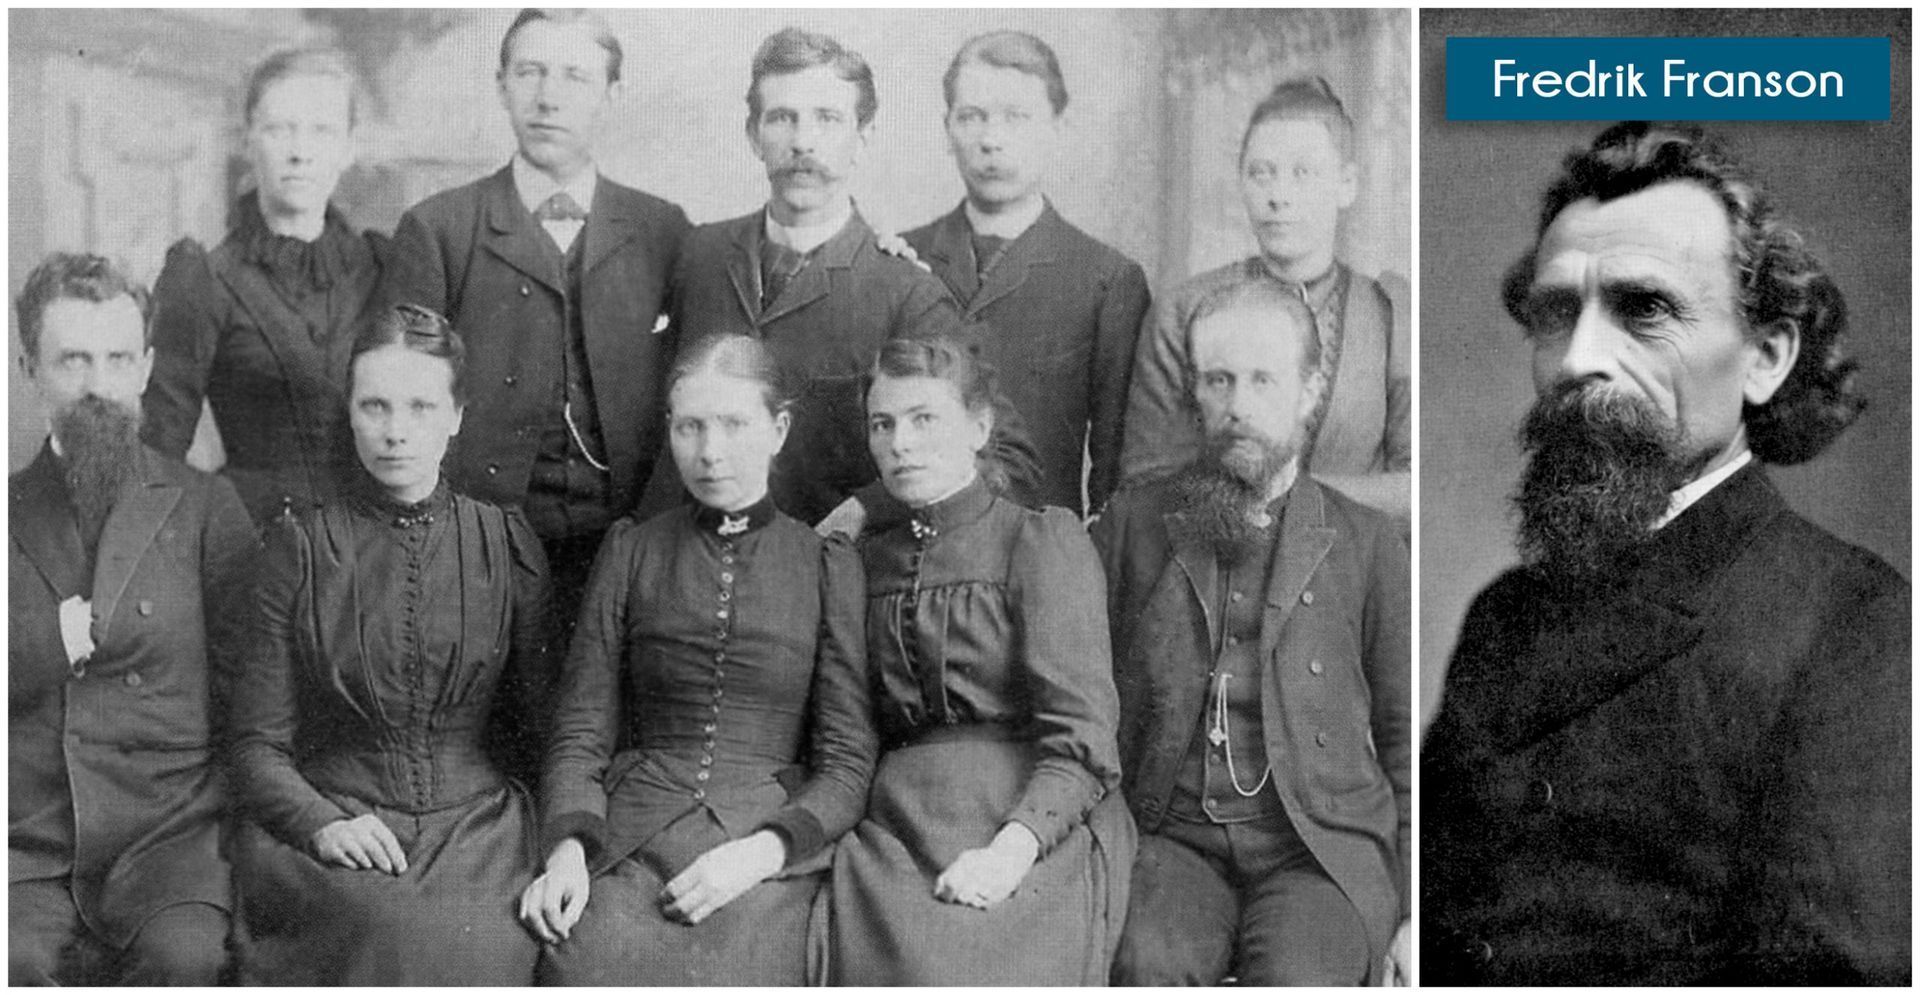 (Left) Fredrik Franson and early missionaries to South Africa. (Right) Fredrik Franson portrait.